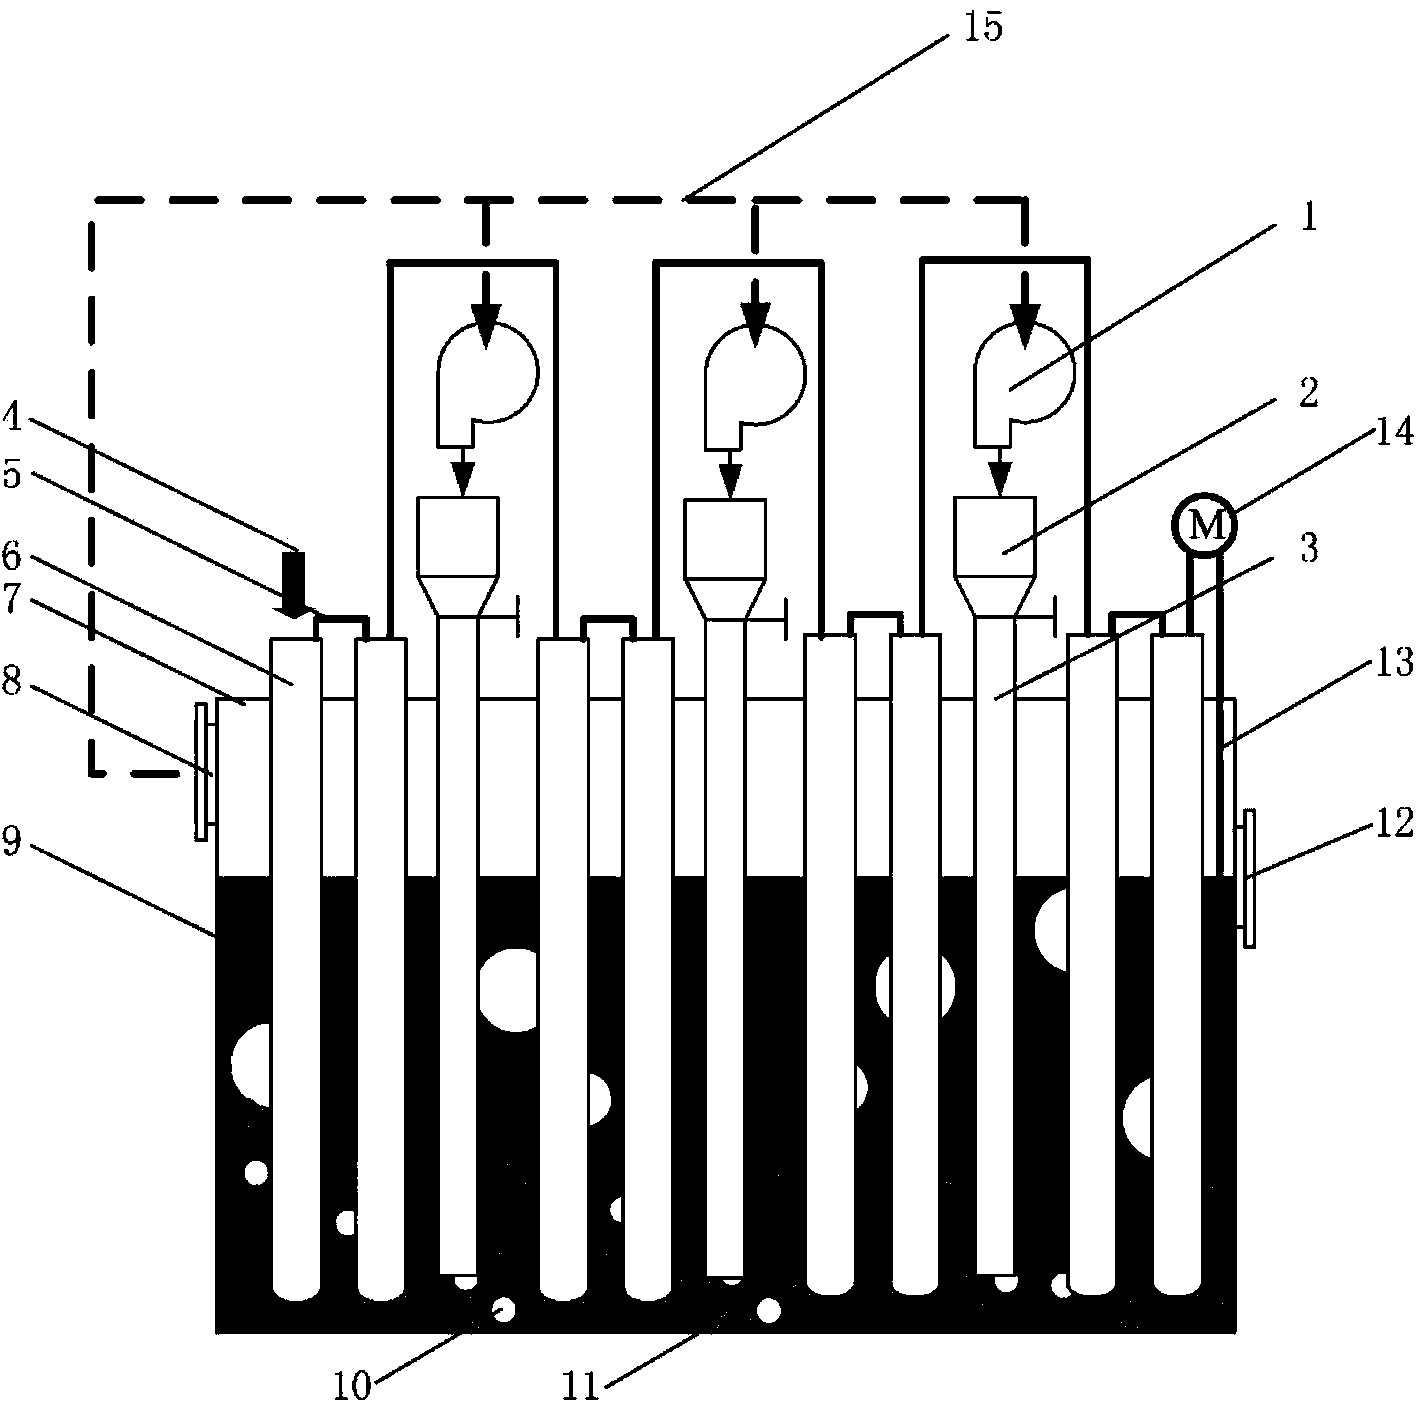 Generating and energy storage integrated device based on direct carbon fuel cells (DCFCs) with liquid metal positive electrode